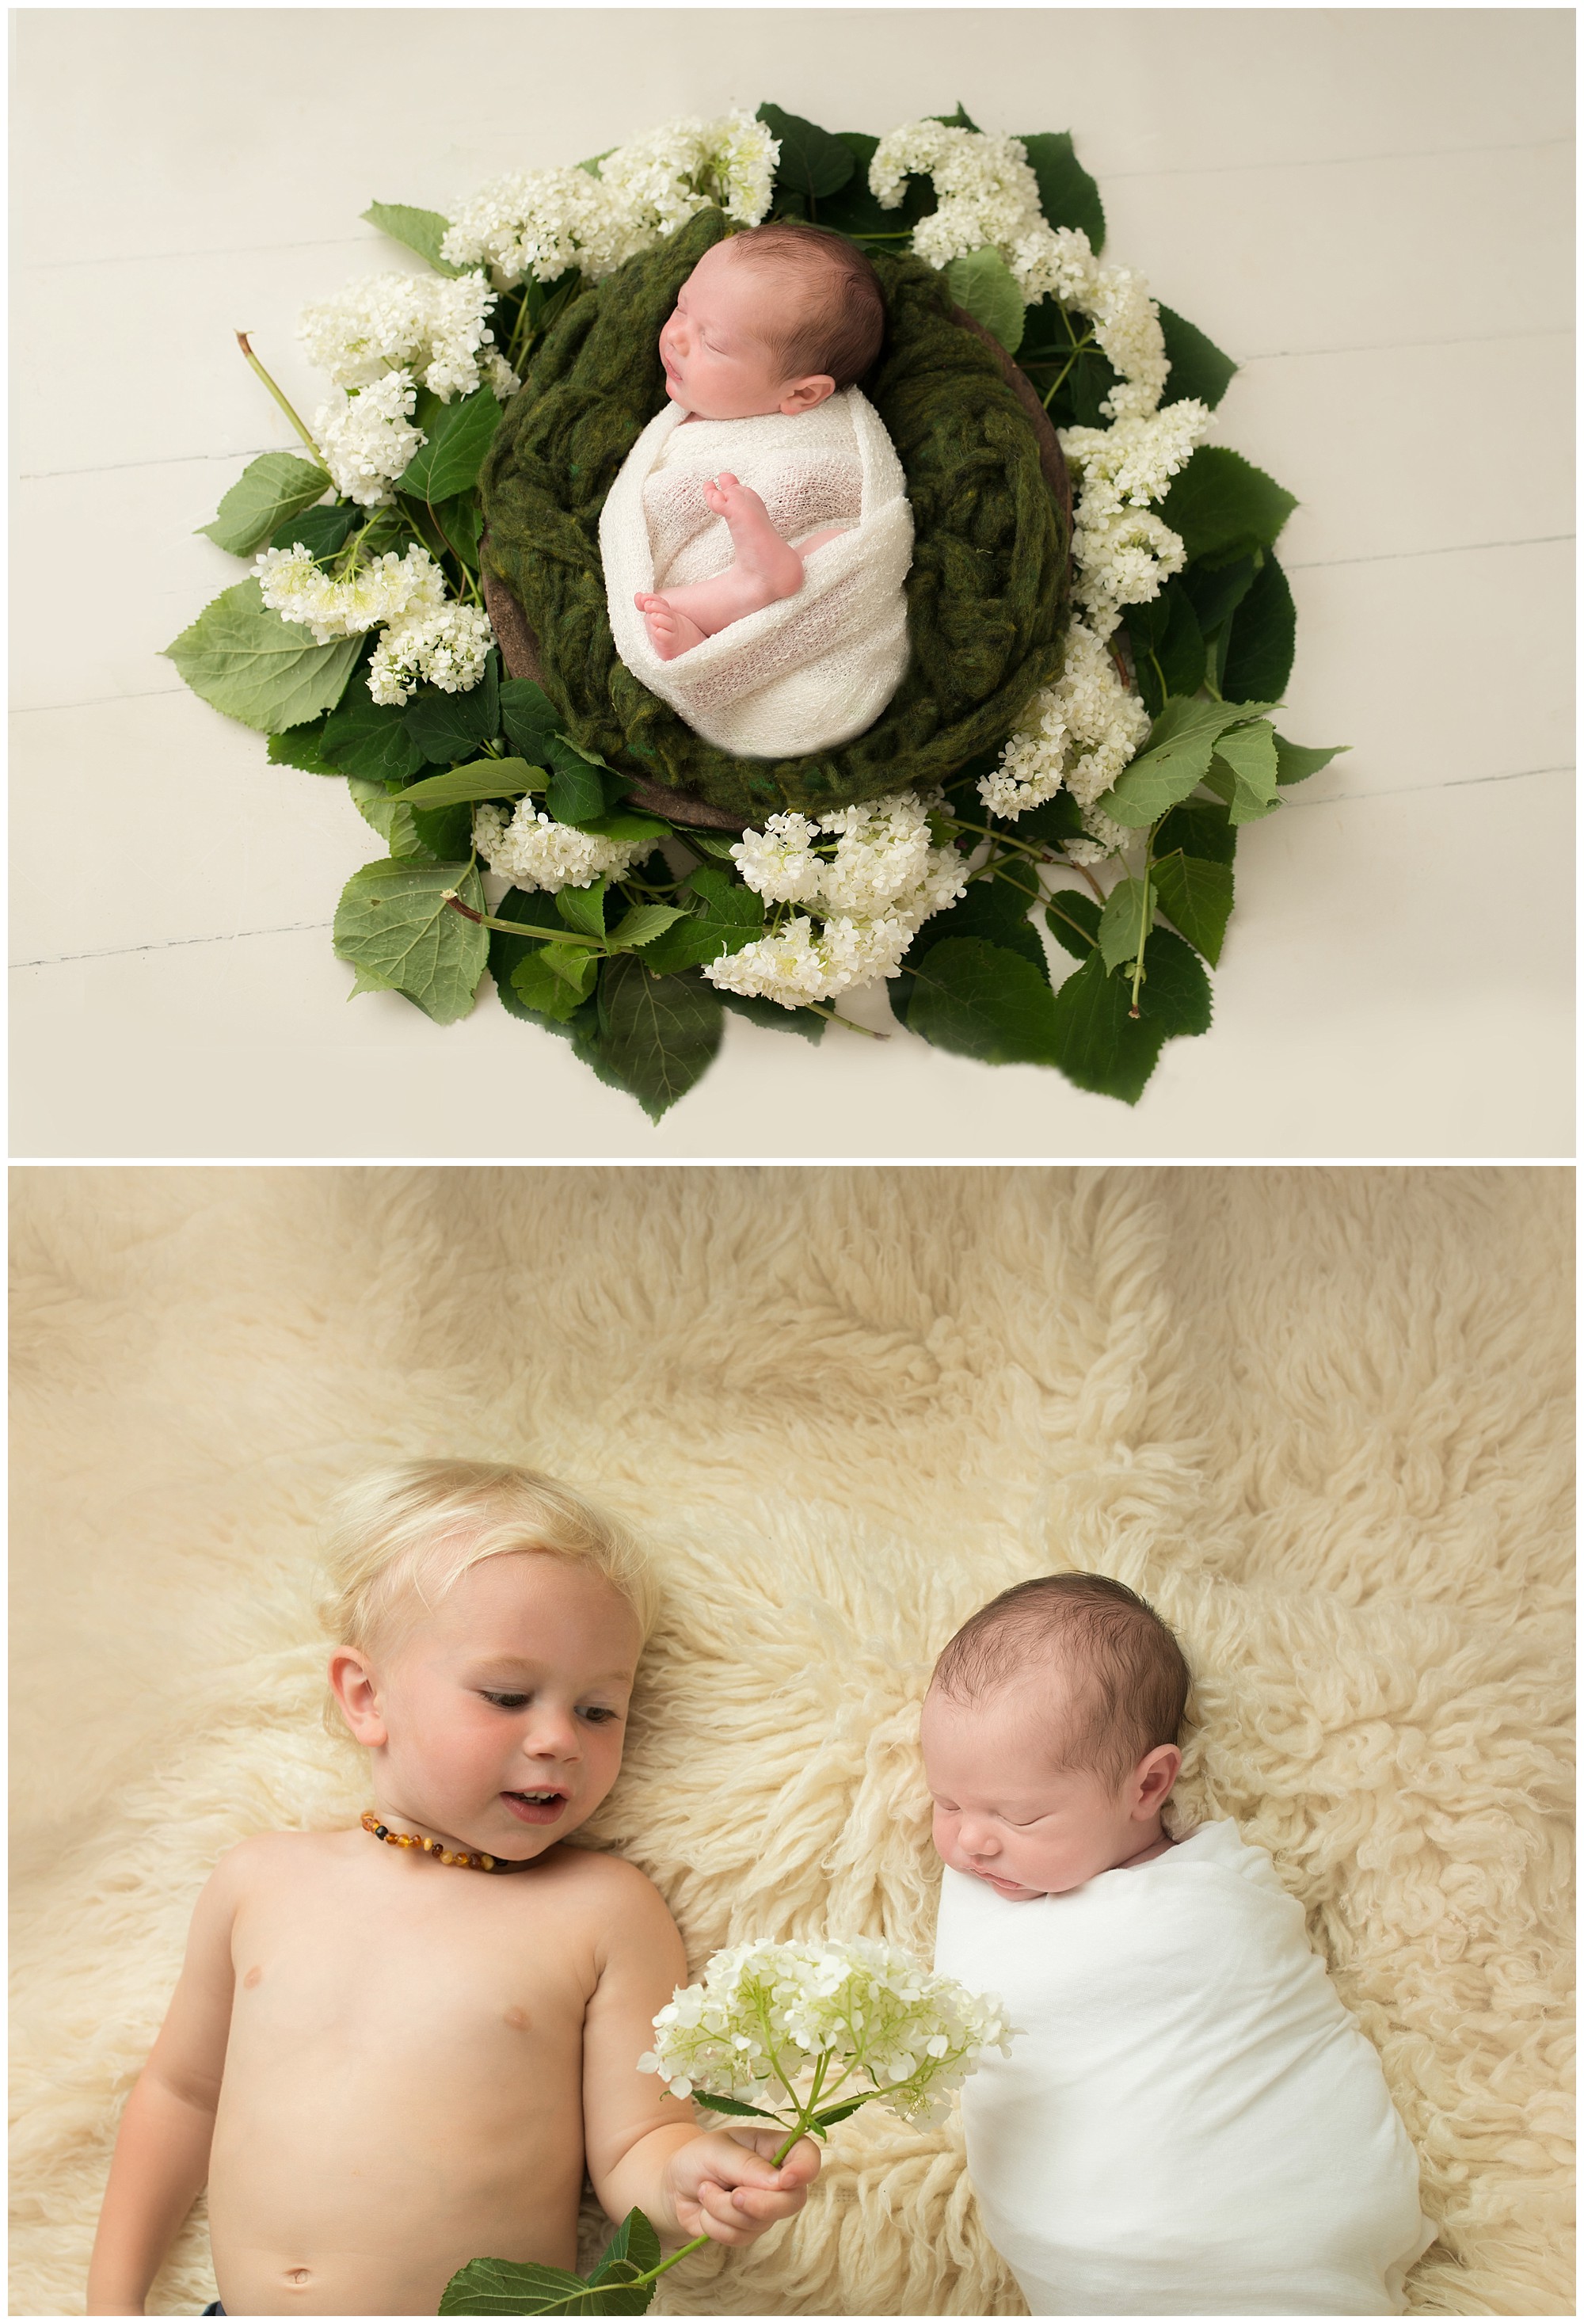 newborn baby in hydrangeas and with her toddler brother on a cream fur rug